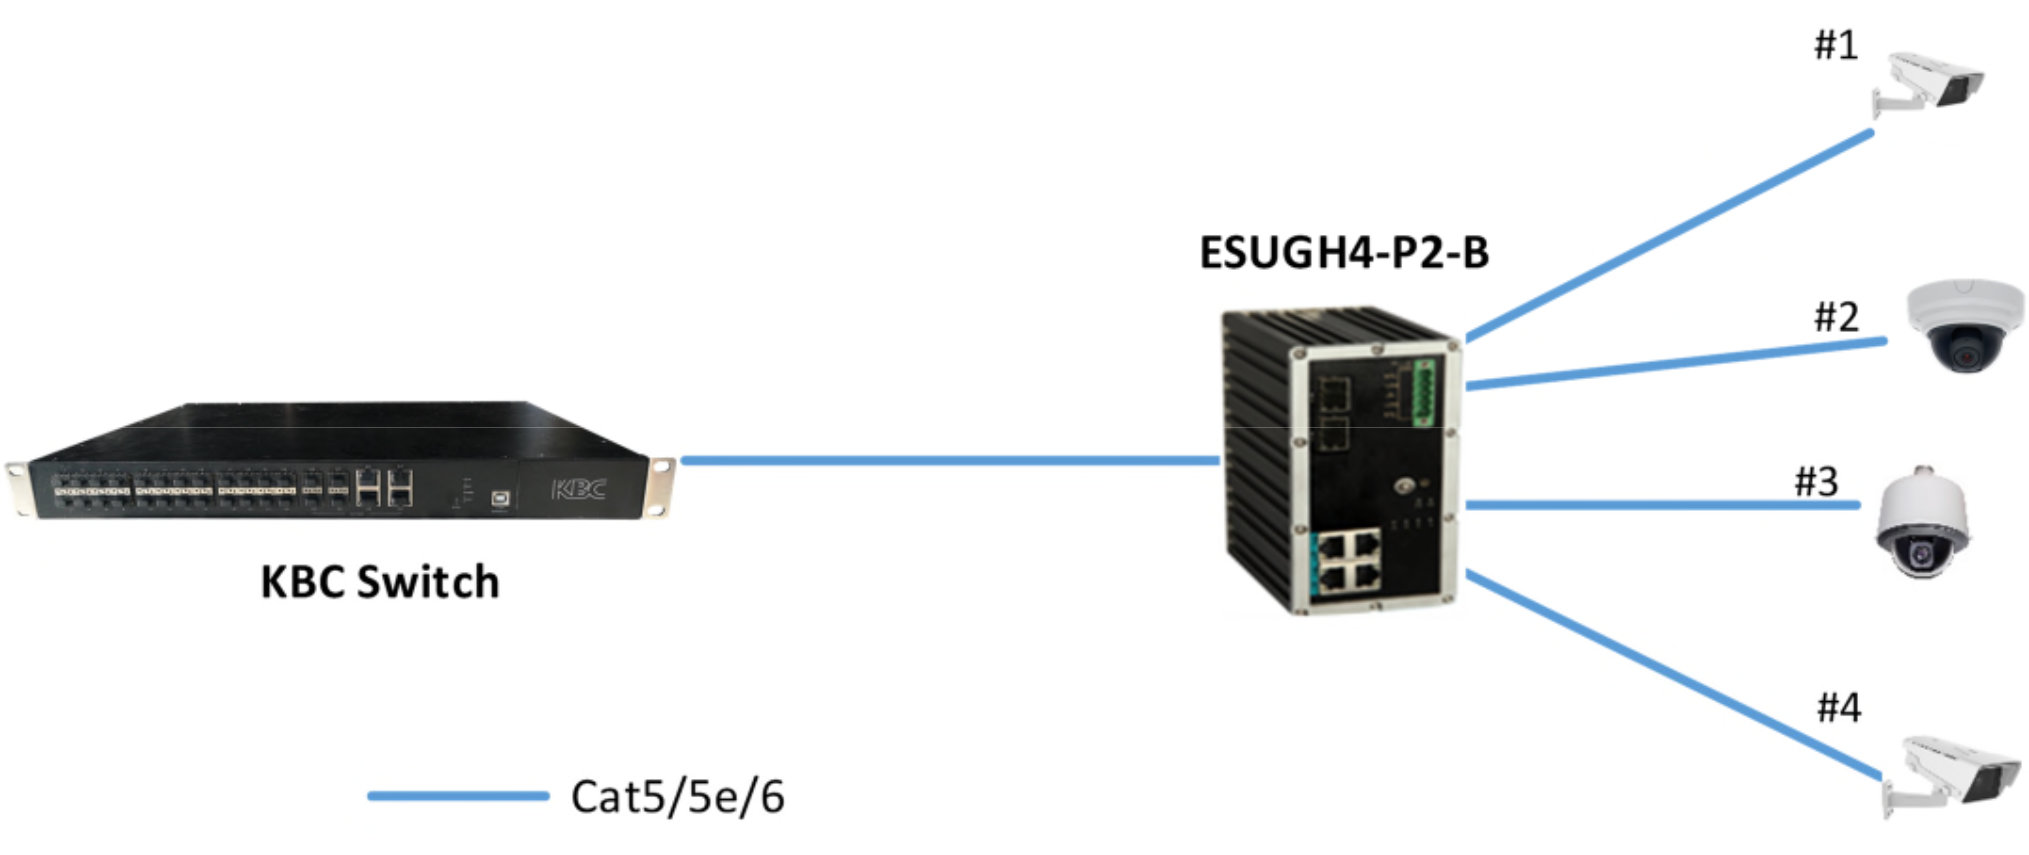 Typical System configuration for ESUGH4-P2-B